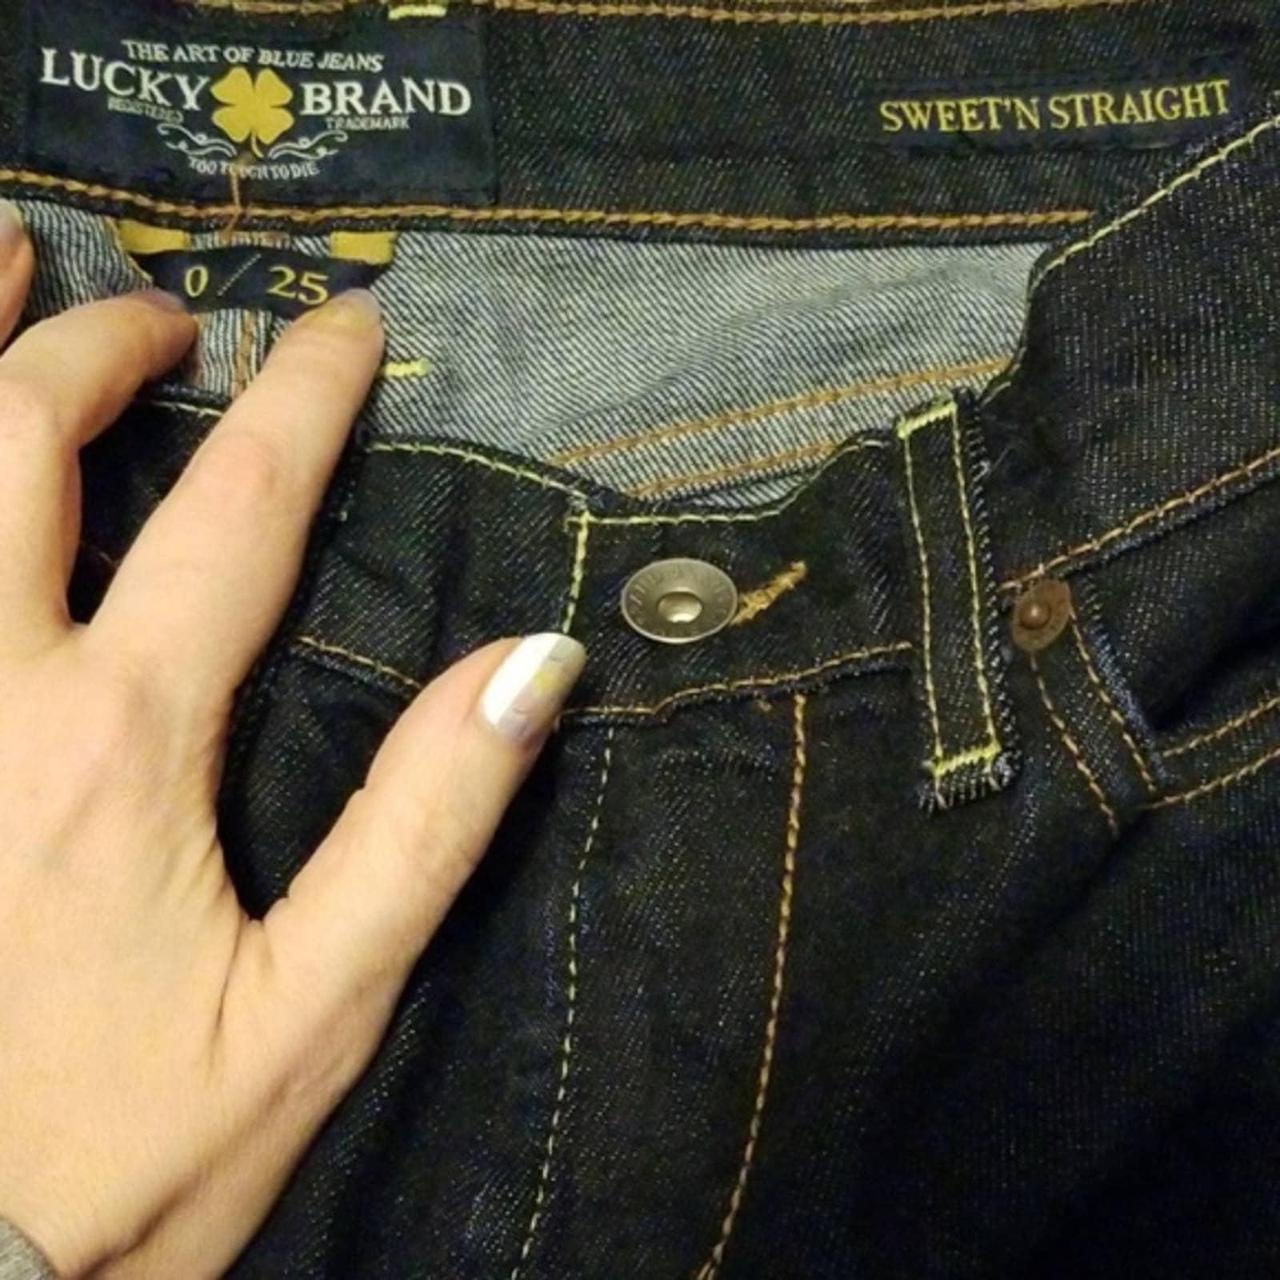 New with tags., Lucky Brand Janet sweet and straight